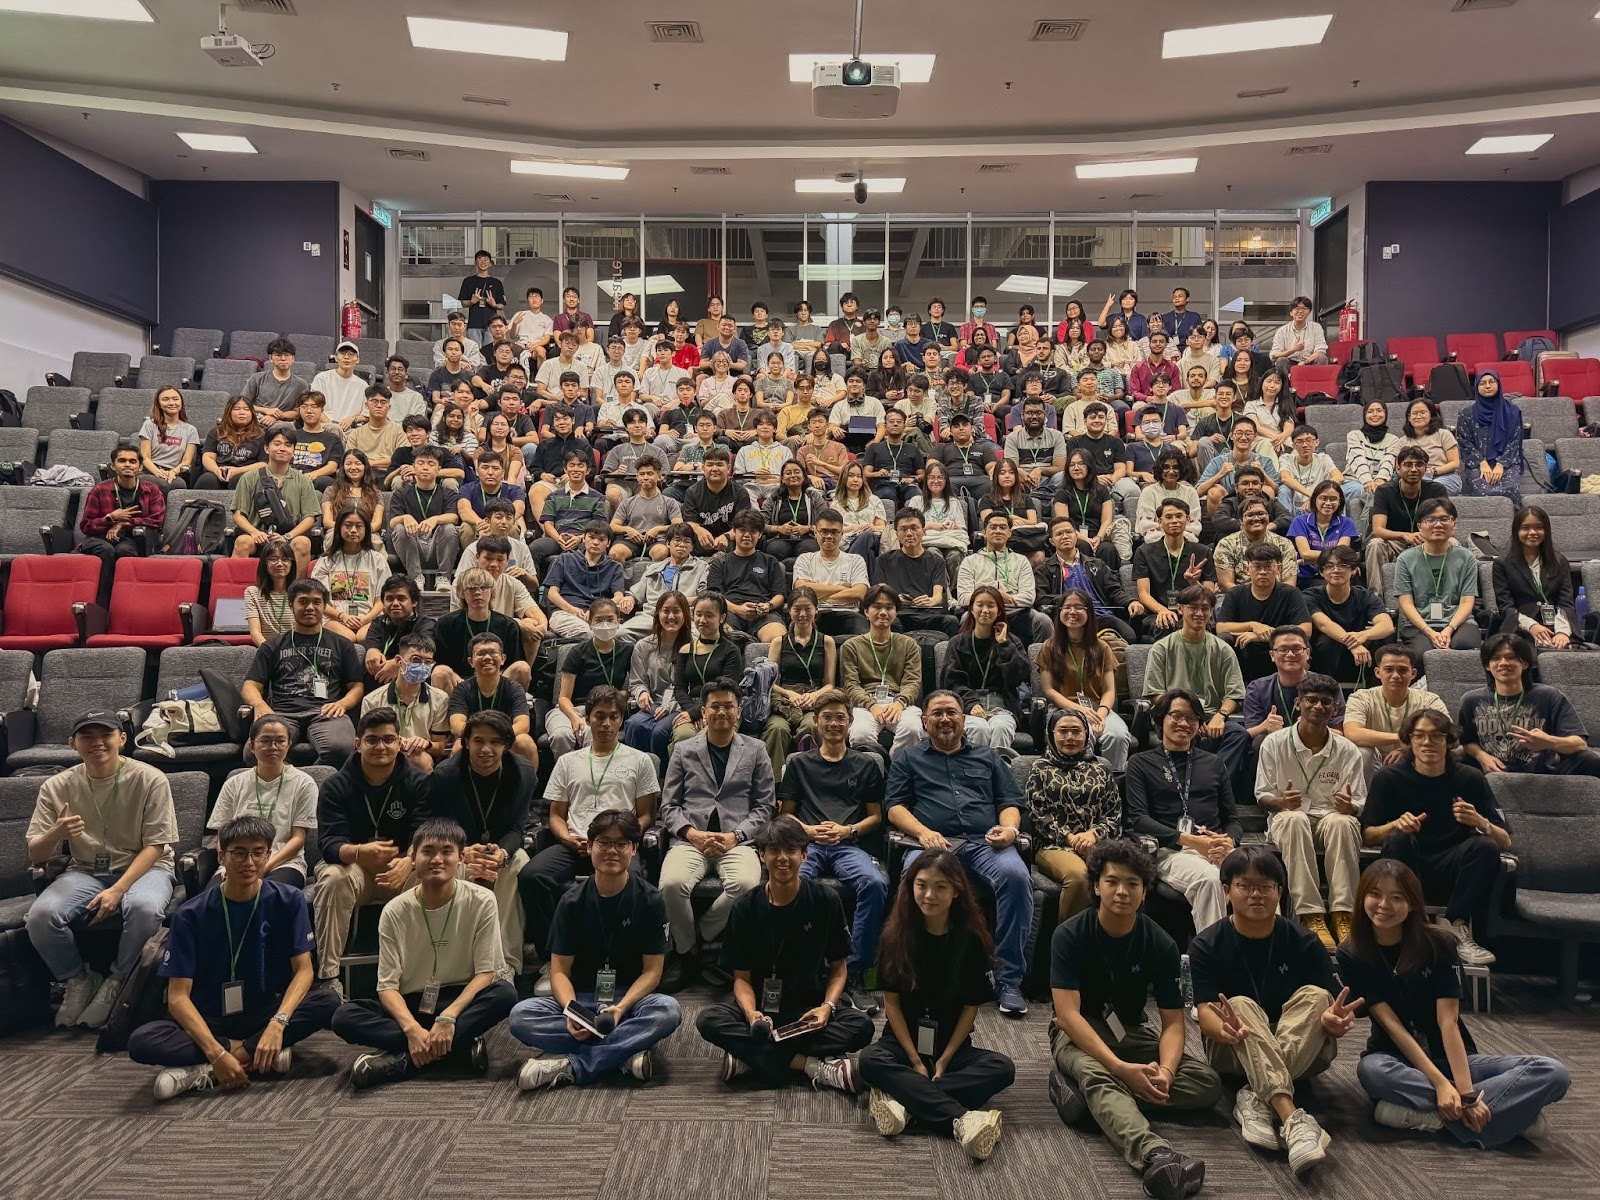 A group of happy hackathon attendees, including participants from Deriv, posing for a group photo in an auditorium